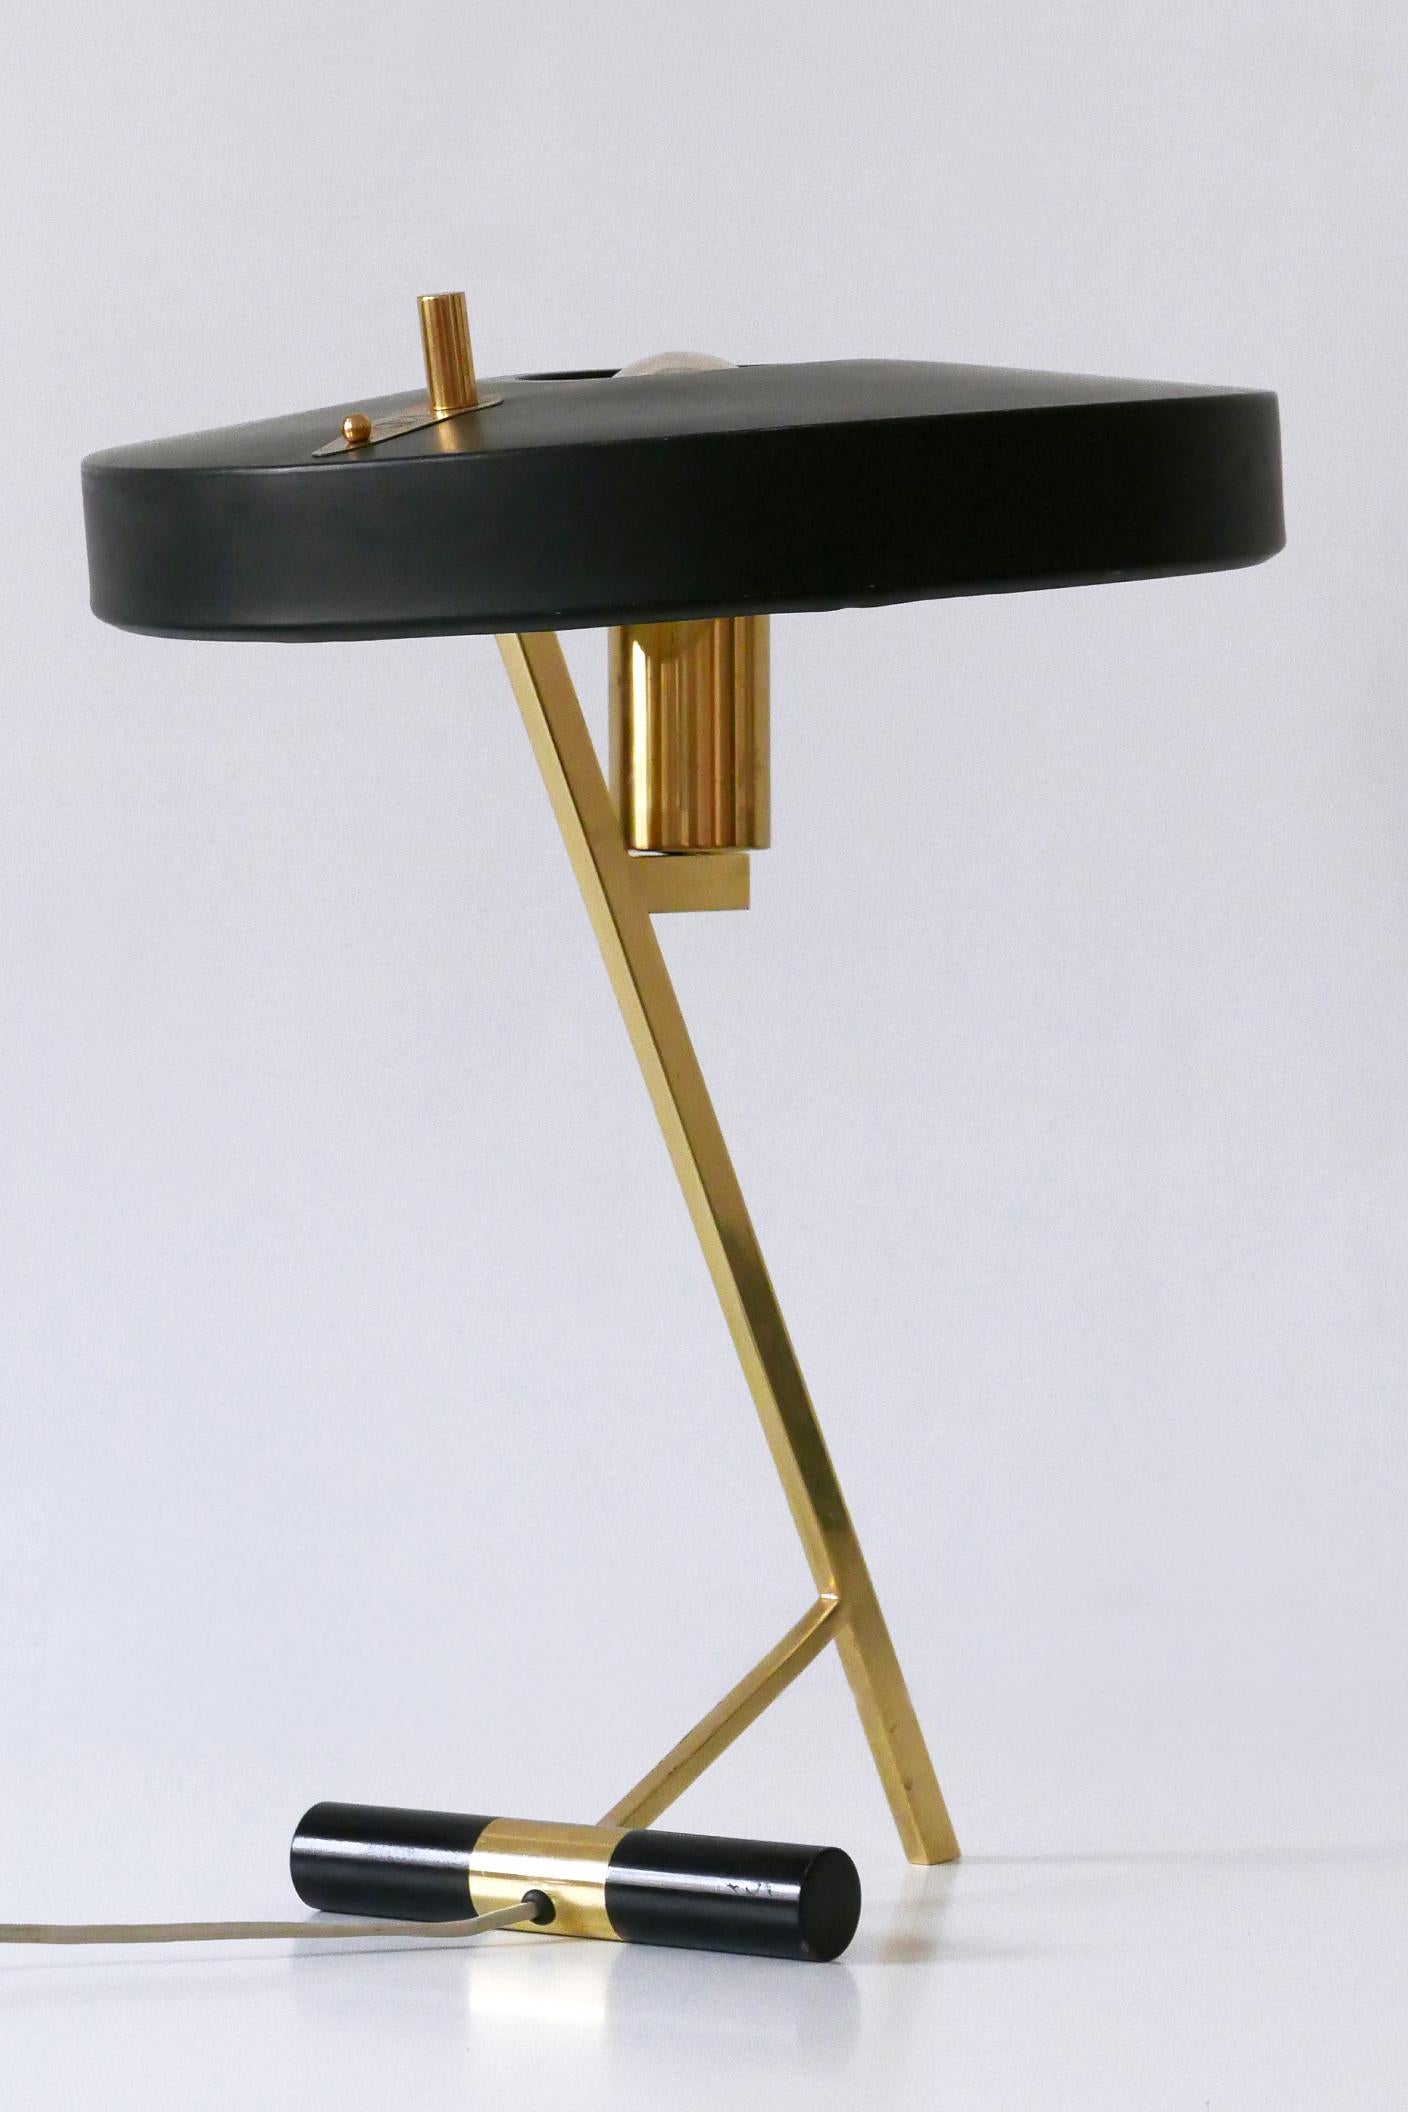 Elegant Mid-Century Modern Z table lamp or desk light. Designed by Louis Kalff for Philips, Netherlands, 1950s.

Executed in brass and aluminium, the table lamp comes with 1 x E27 / E26 Edison screw fit bulb holder, is wired, in working condition